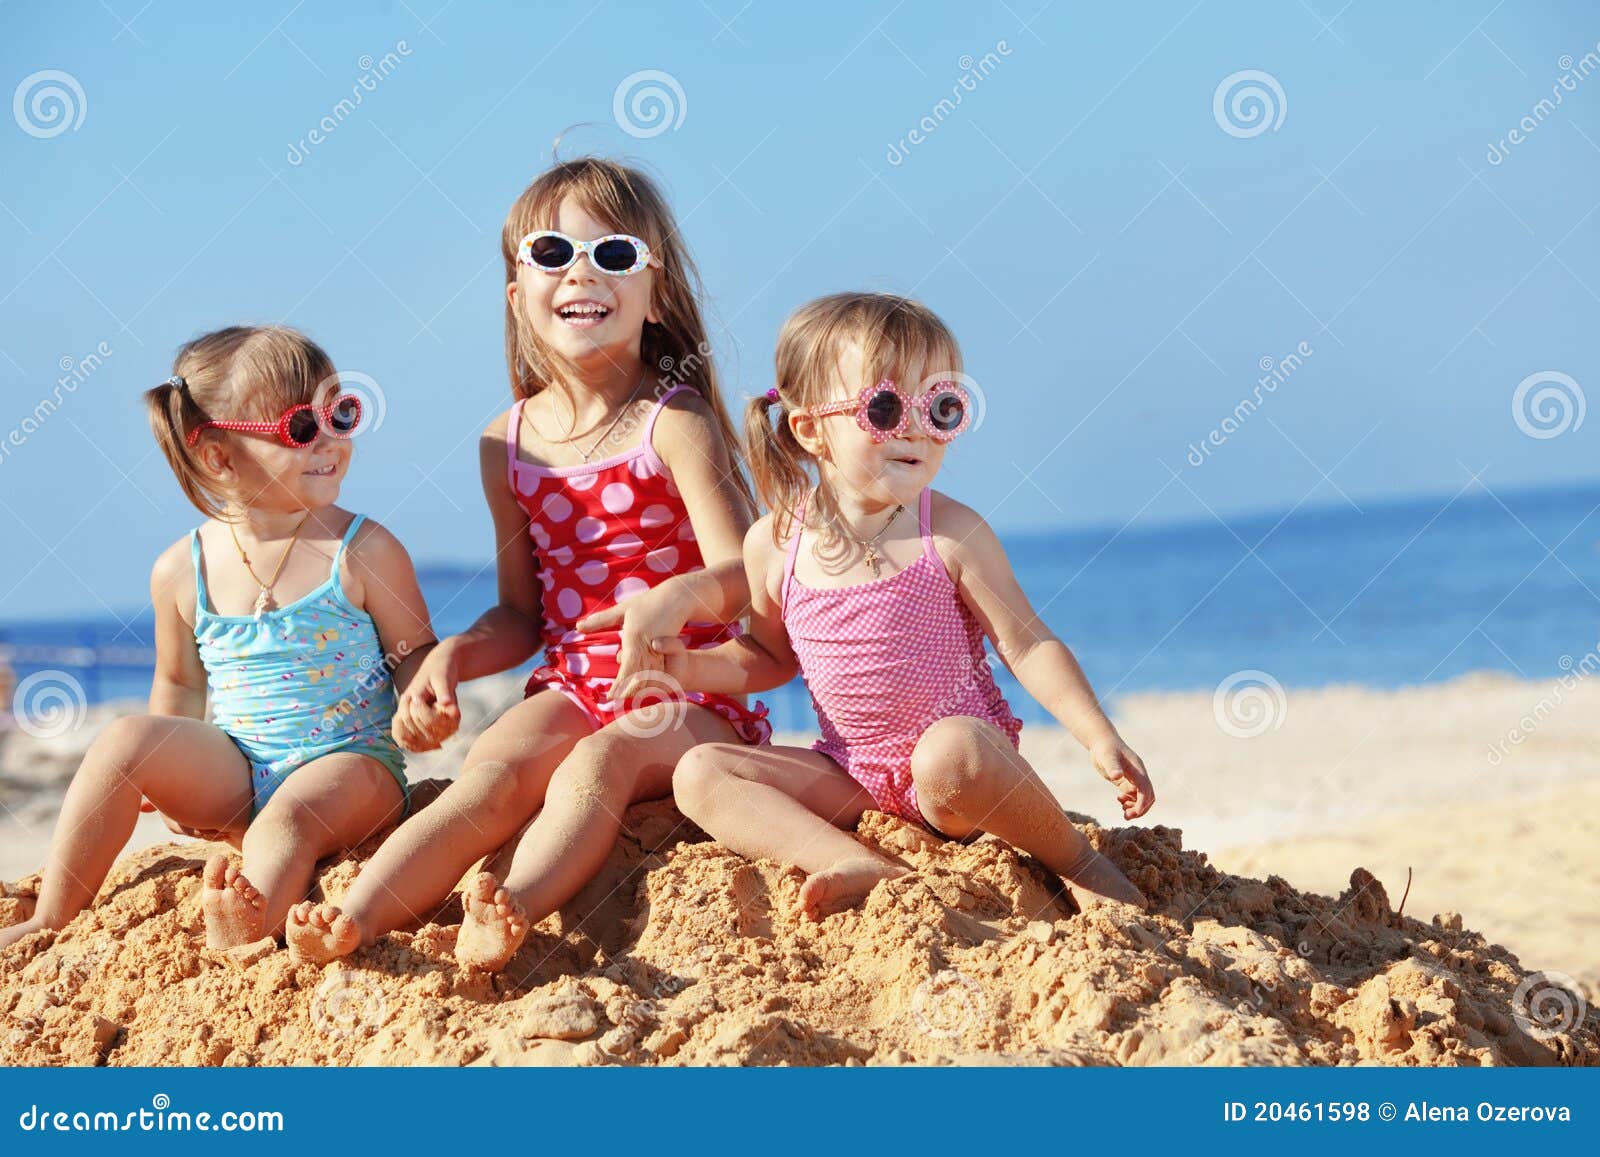 kids playing at the beach